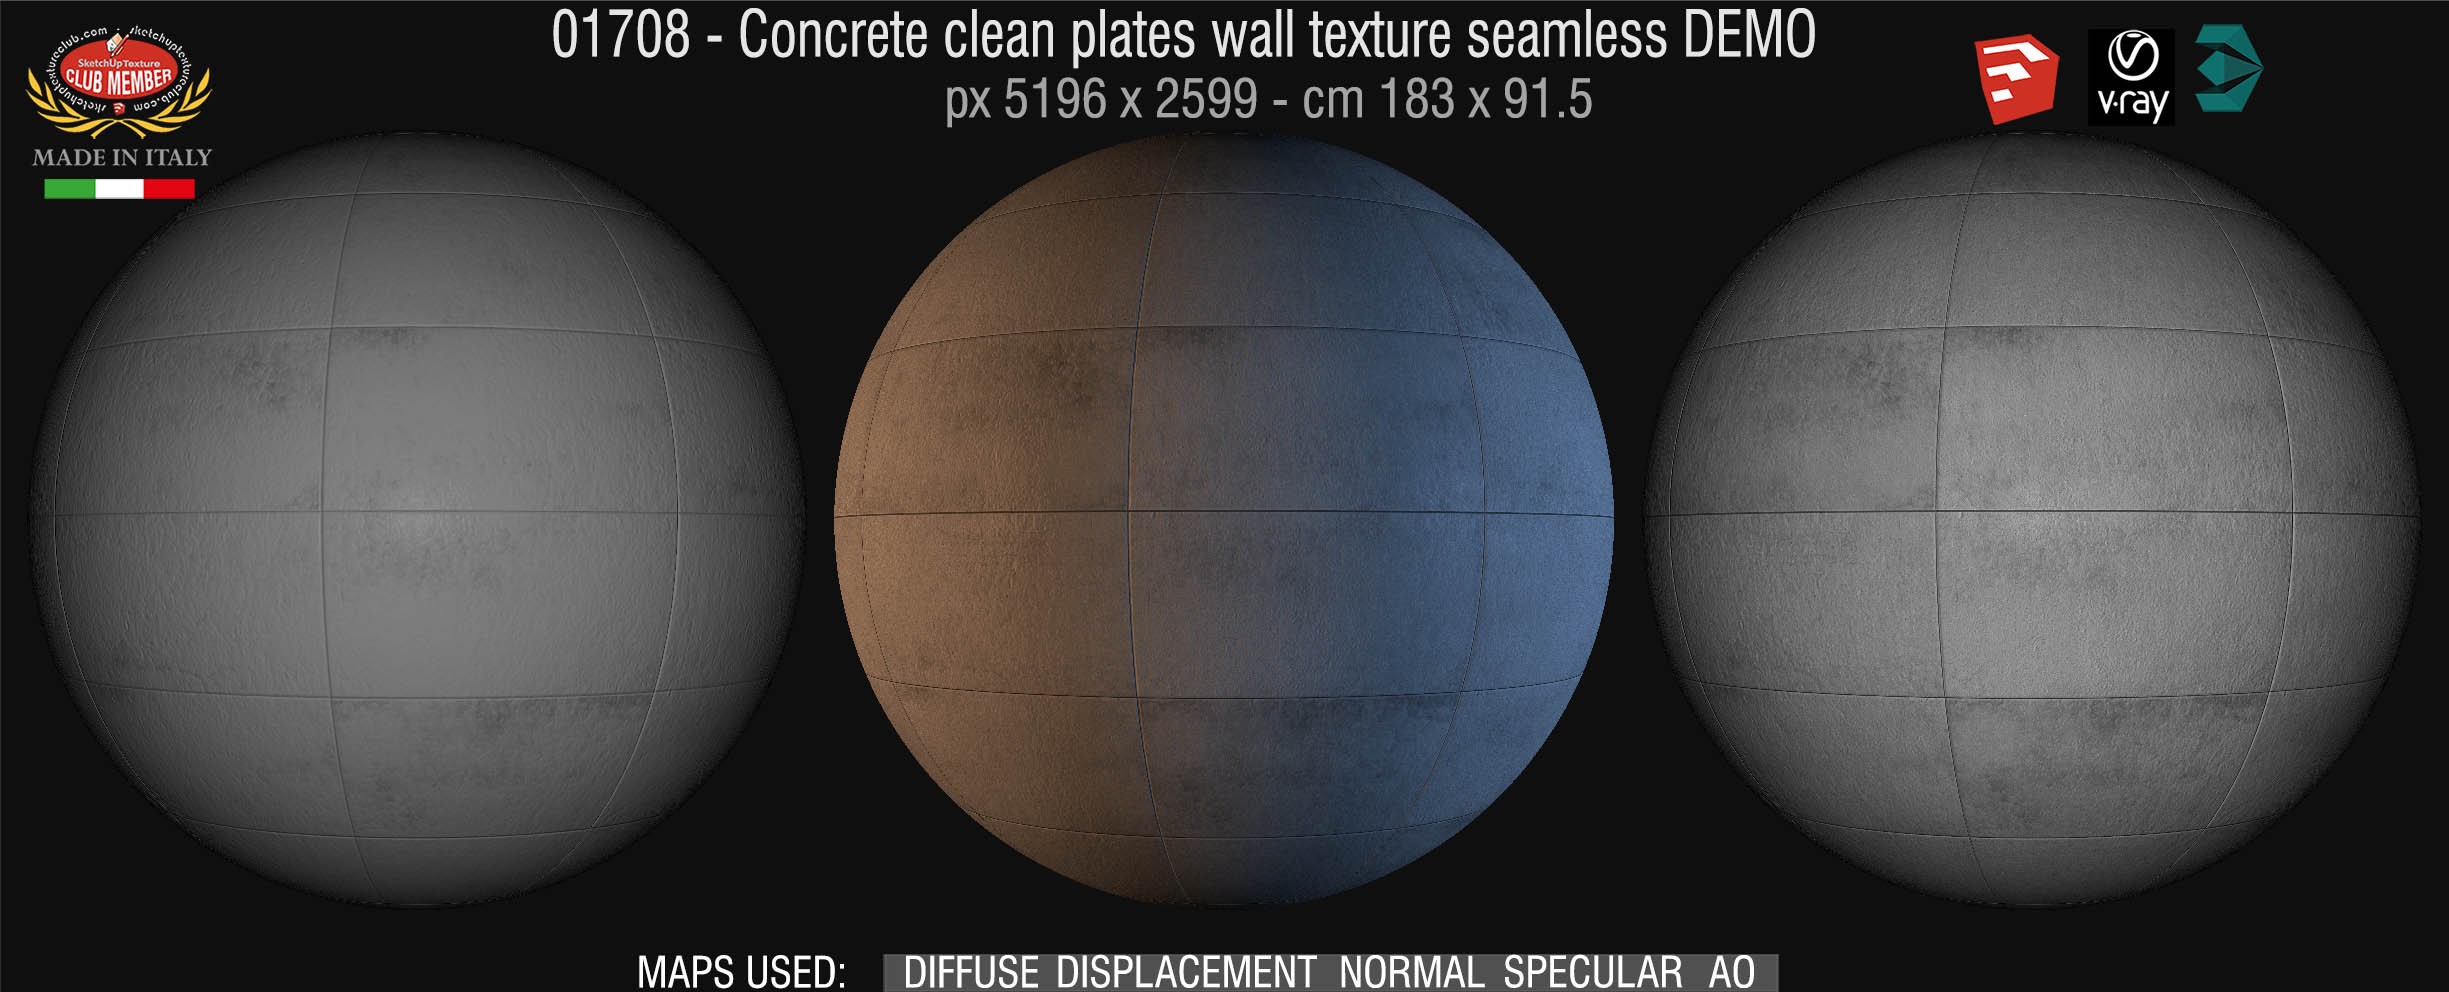 01708 Concrete clean plates wall texture seamless + maps DEMO